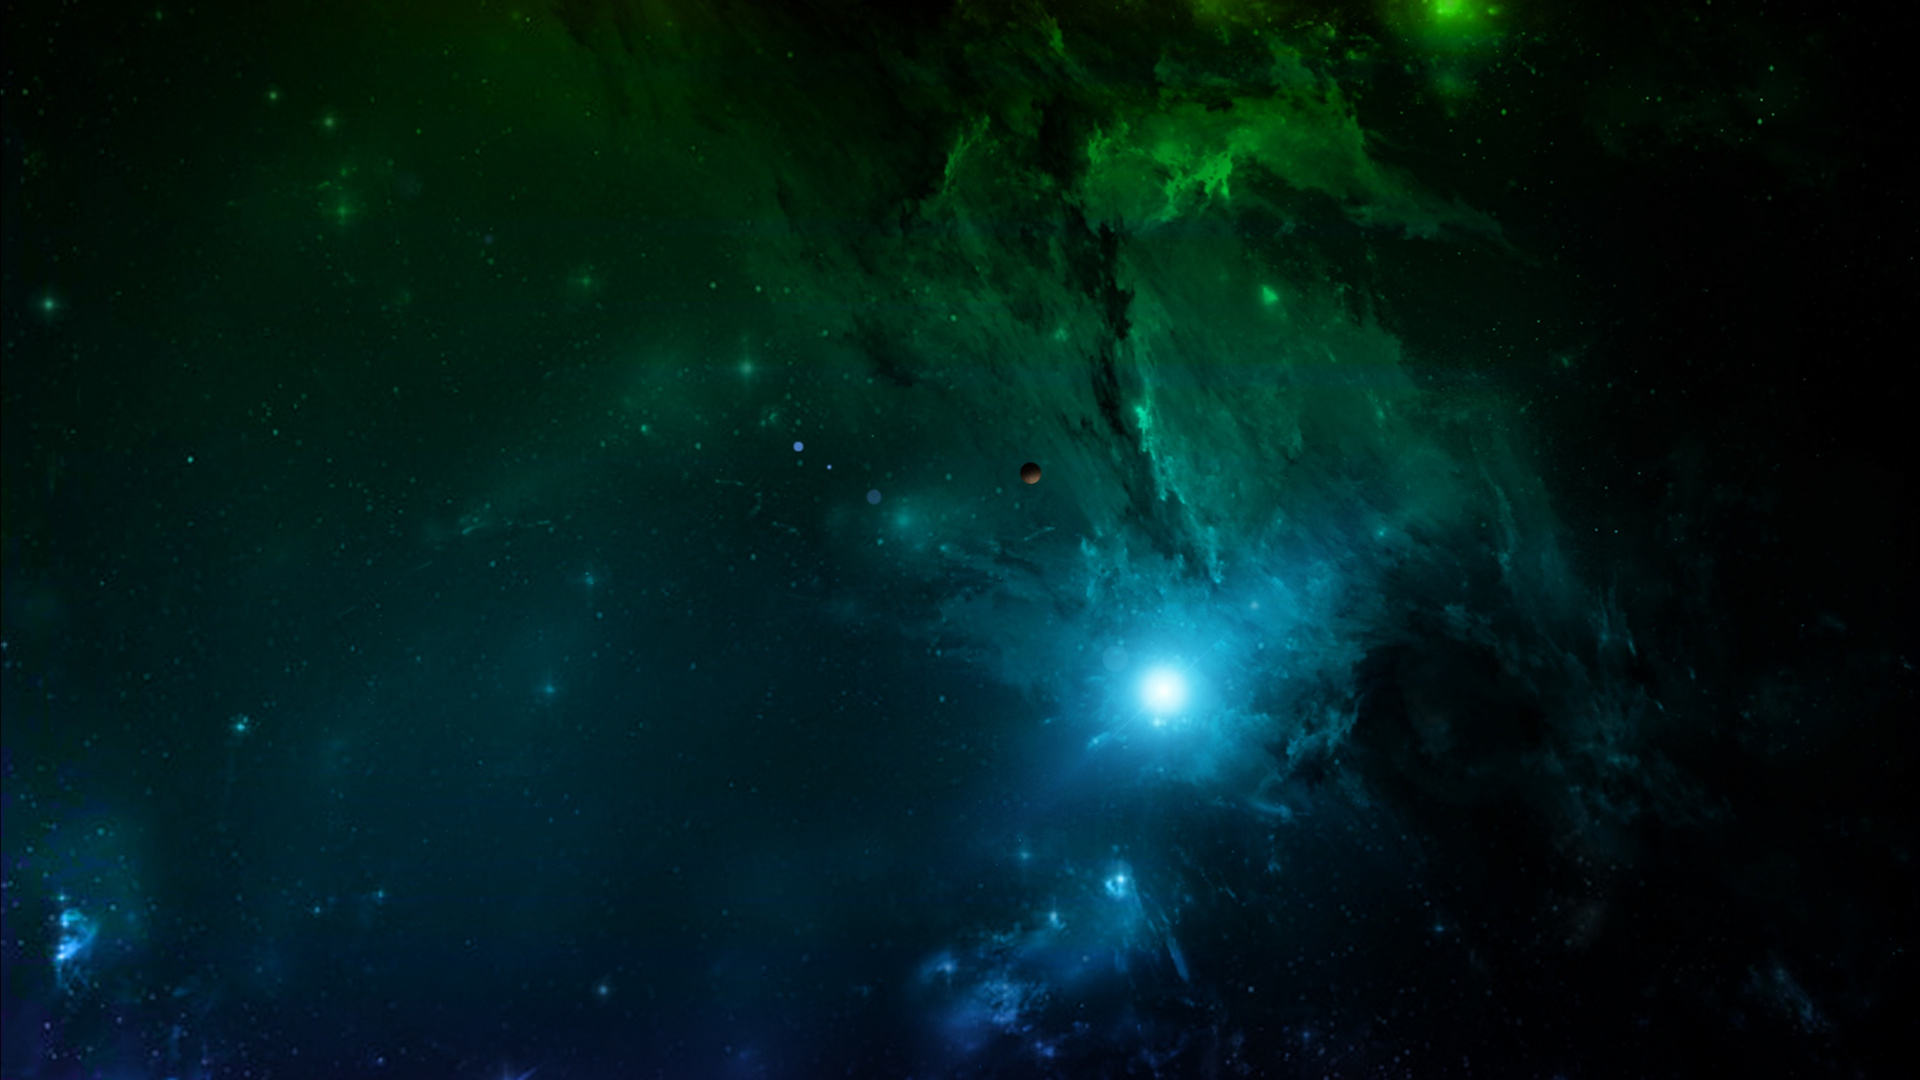 Green and Blue Galaxy Illustration. Wallpaper in 1920x1080 Resolution